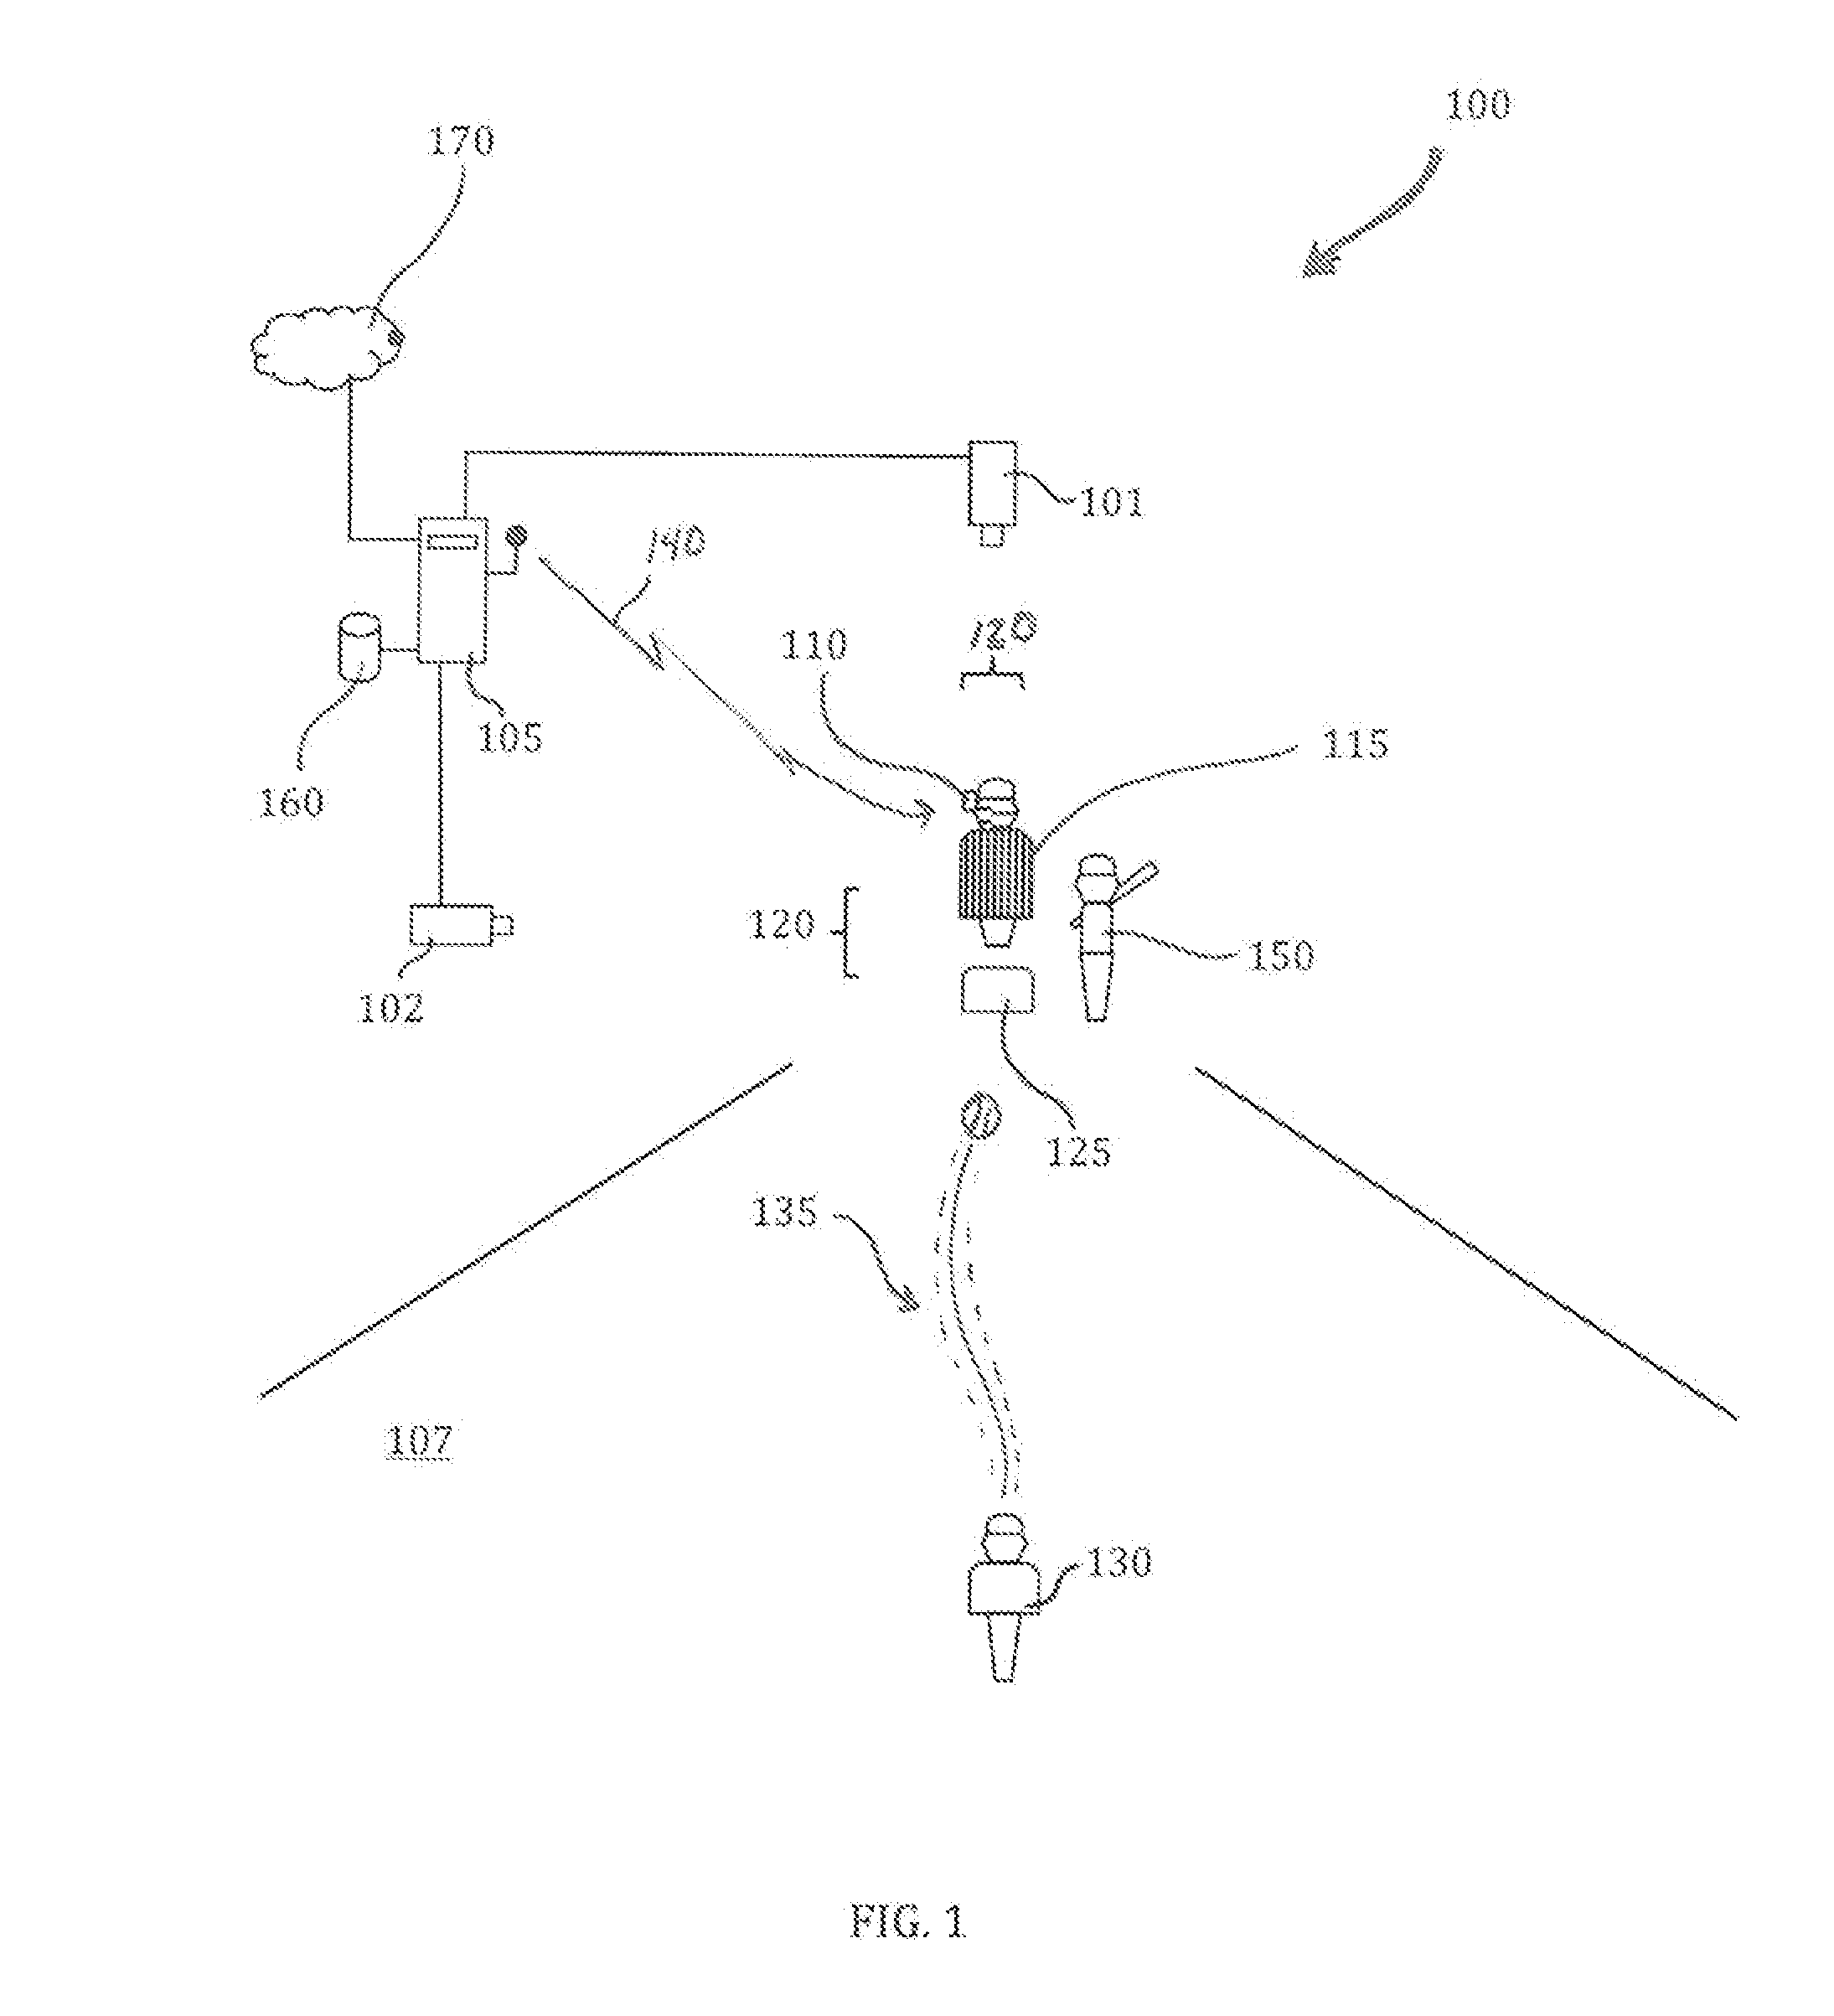 Systems and methods for wirelessly indicating strike/ball to a home plate umpire of a baseball game